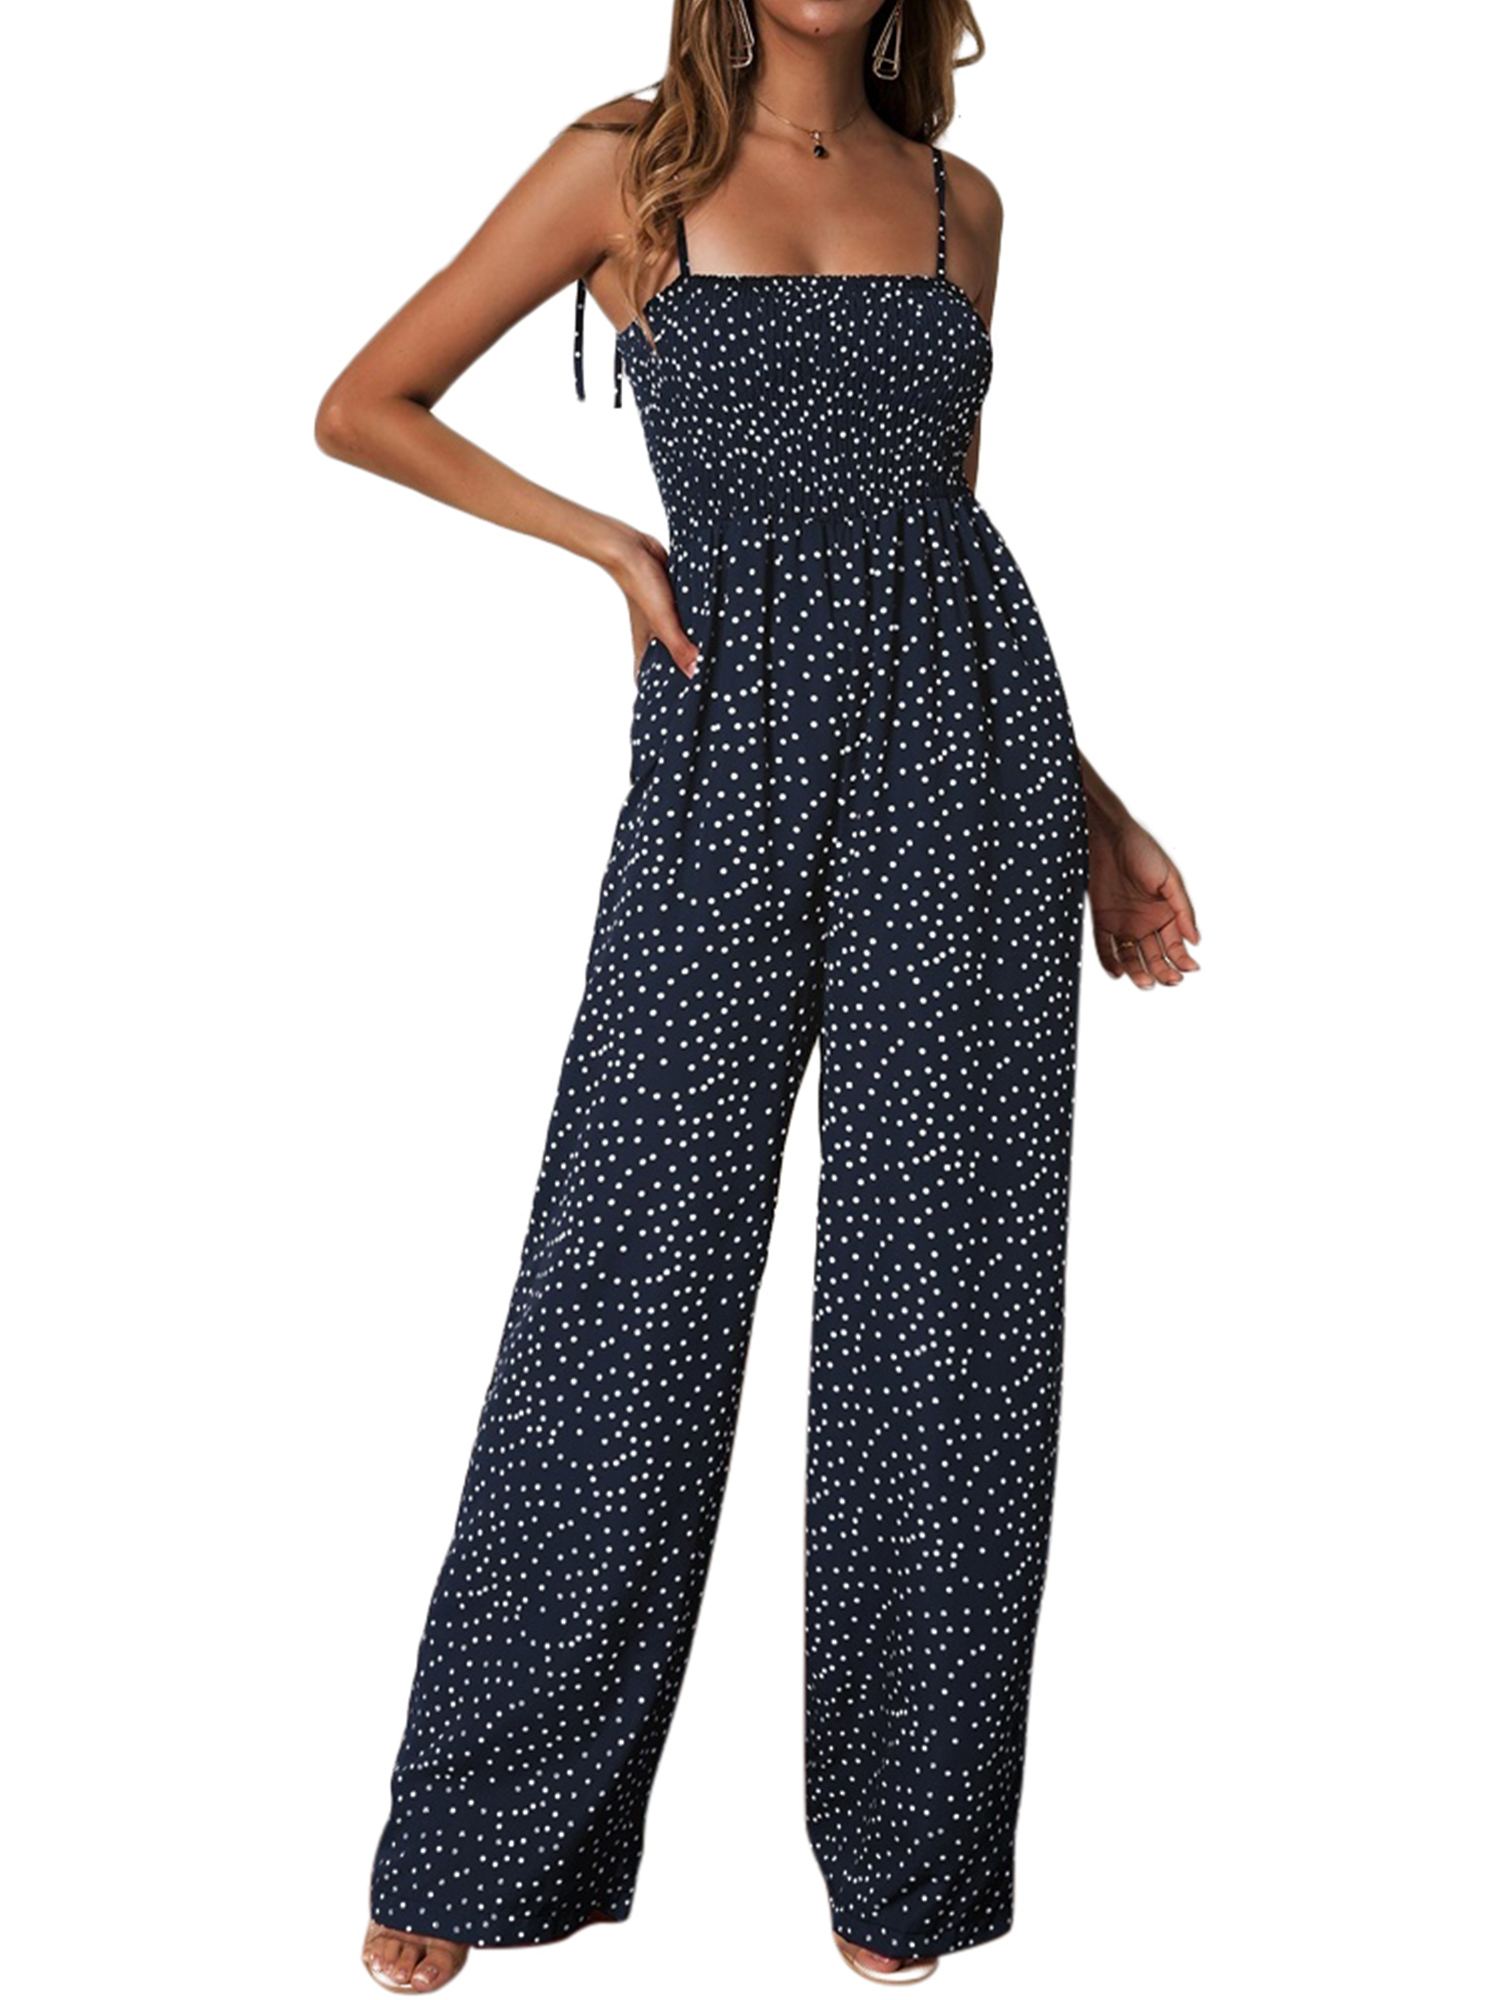 Strapless Jumpsuit For Women Polka Dot Wide Leg Evening Party Playsuit Ladies Casual Loose Rompers Long Trousers - image 1 of 8